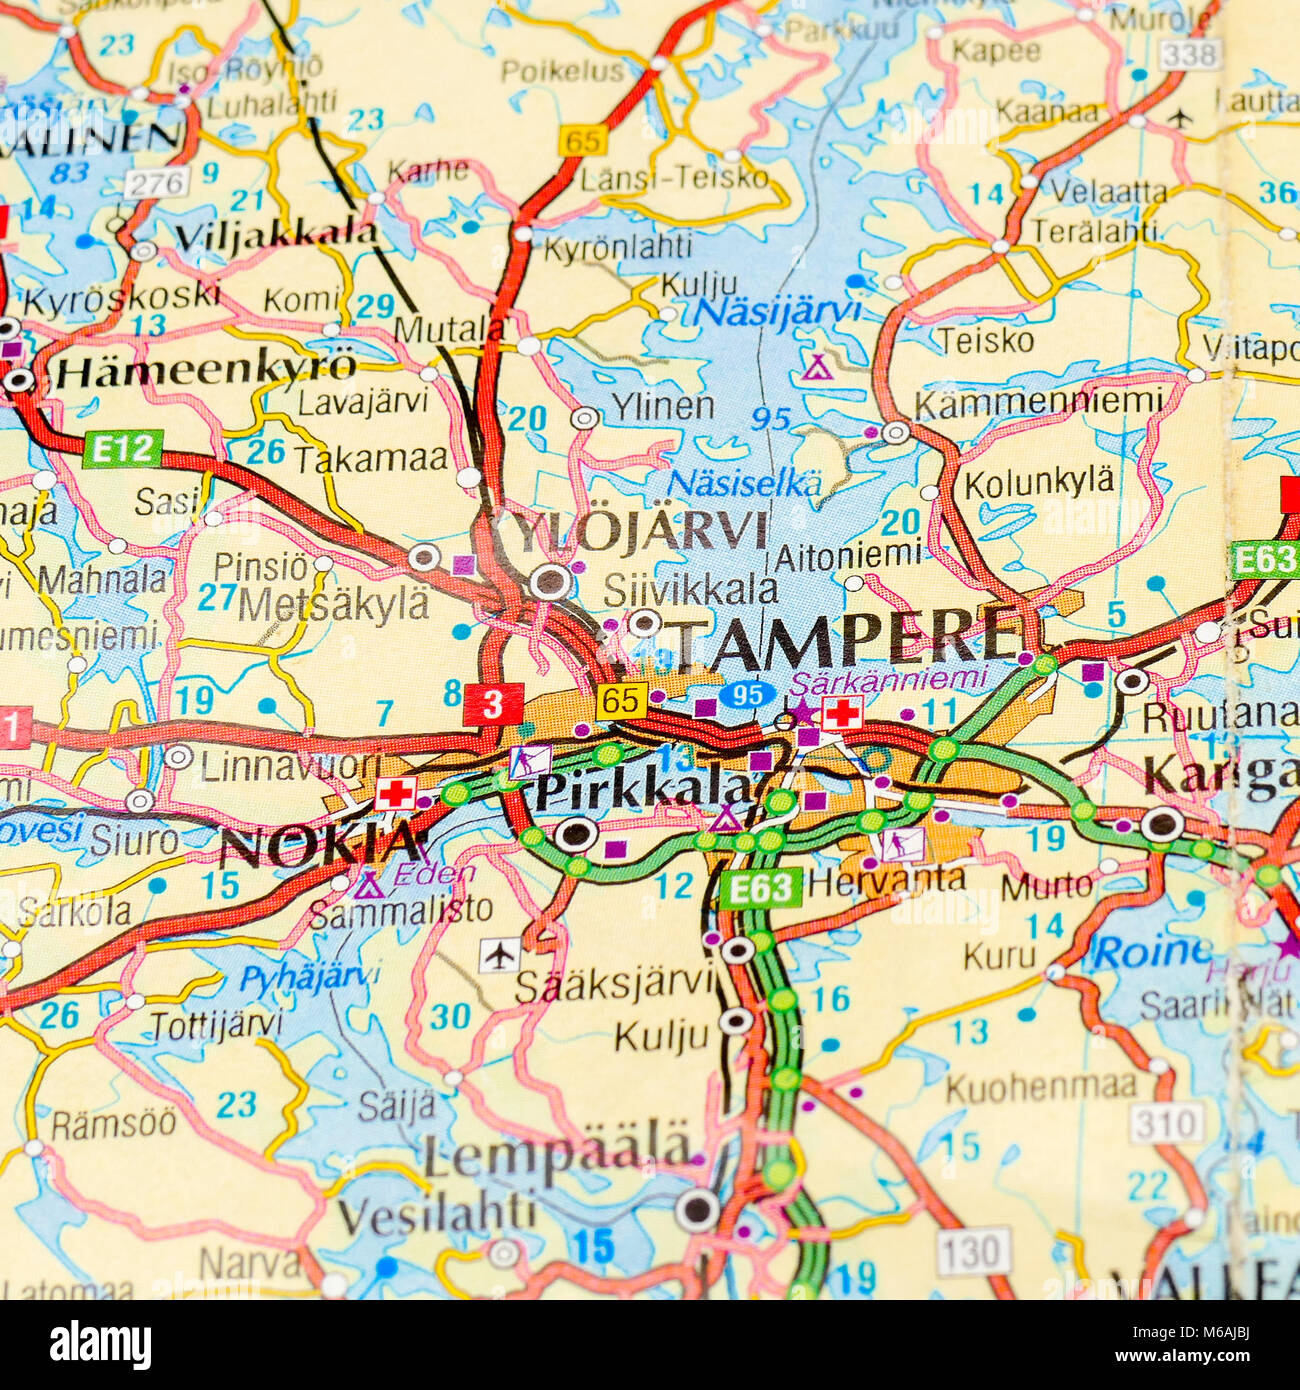 Tampere on a map Stock Photo